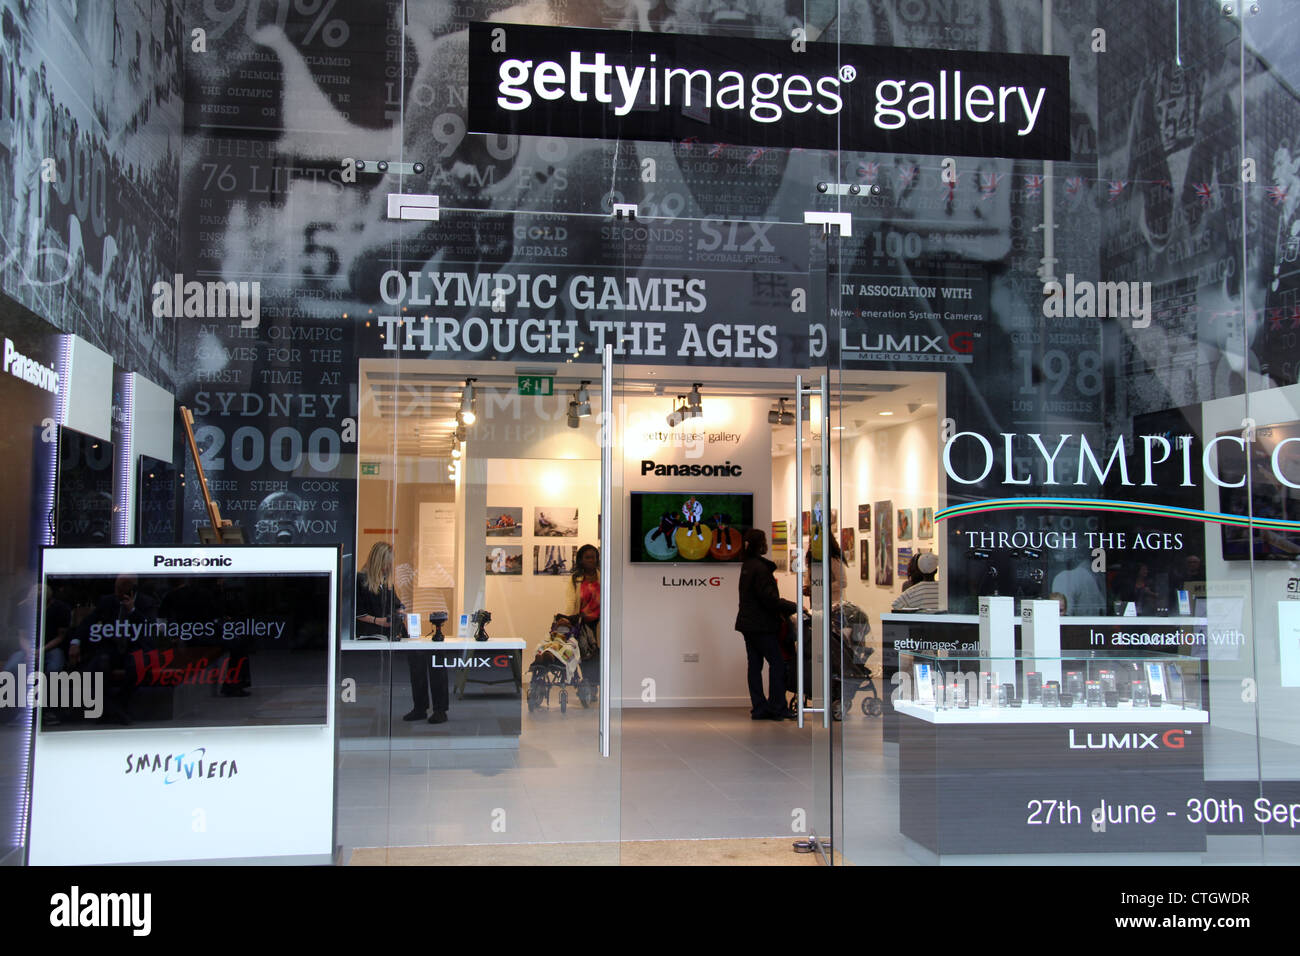 Getty Images Gallery at Westfield Stratford City à Londres Banque D'Images